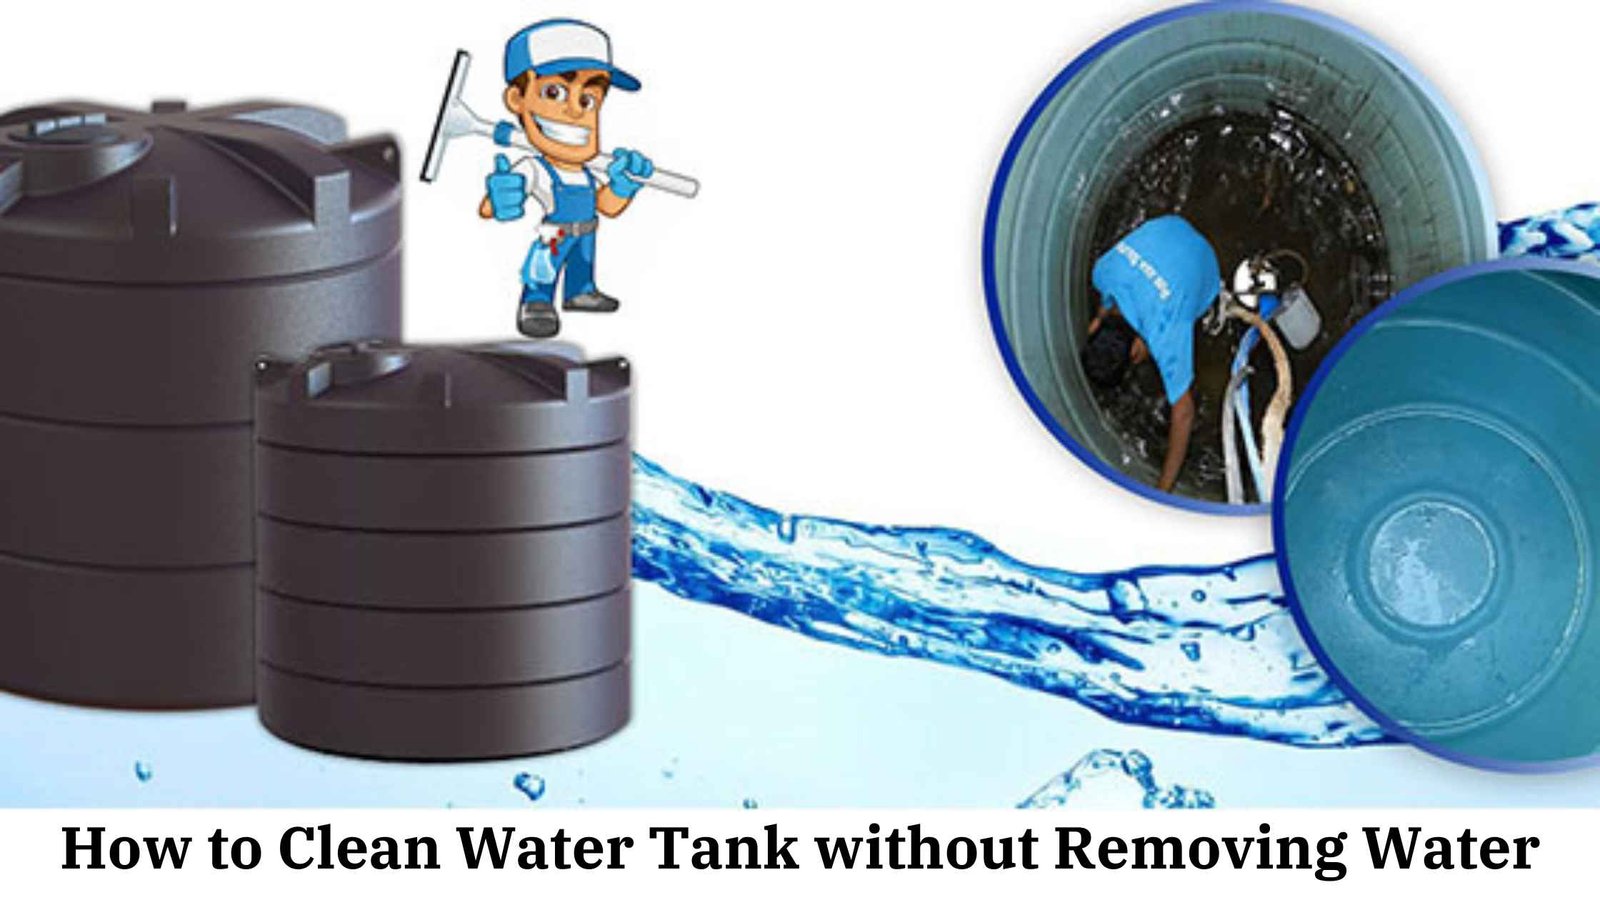 How to Clean Water Tank without Removing Water